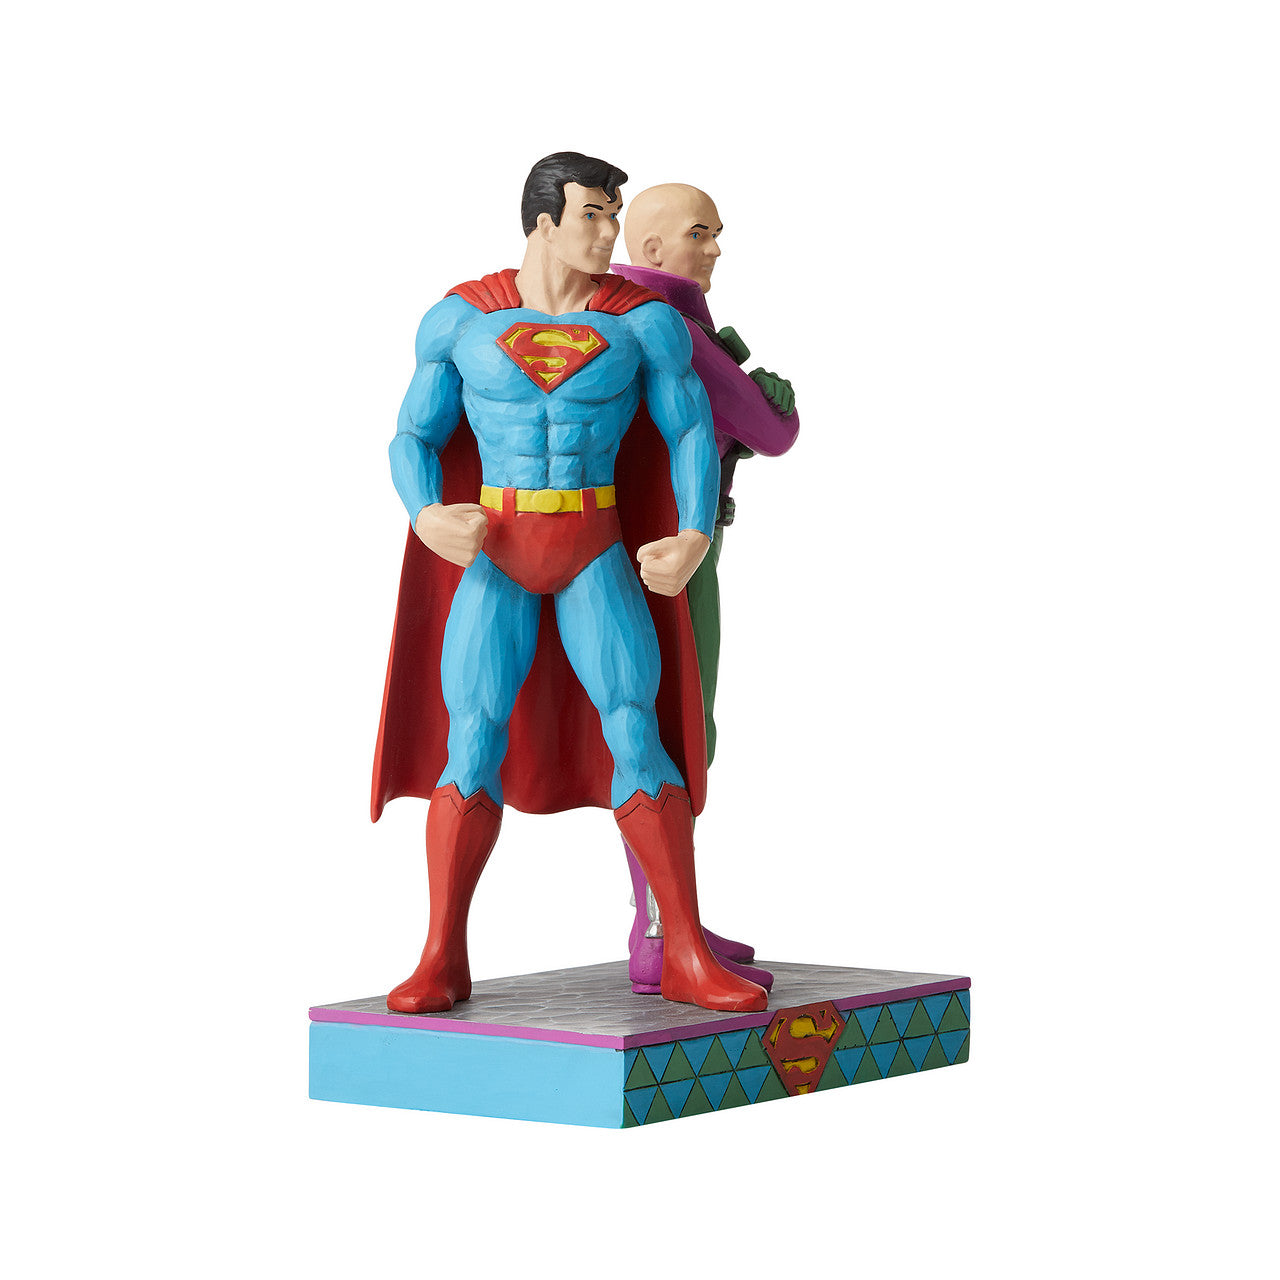 Jim Shore Superman and Lex Luthor Figurine  Jim Shore celebrates Superman and Lex Luther back to back in his signature wood carved look and folk art styling. Sure to be a treasured gift across the generations.